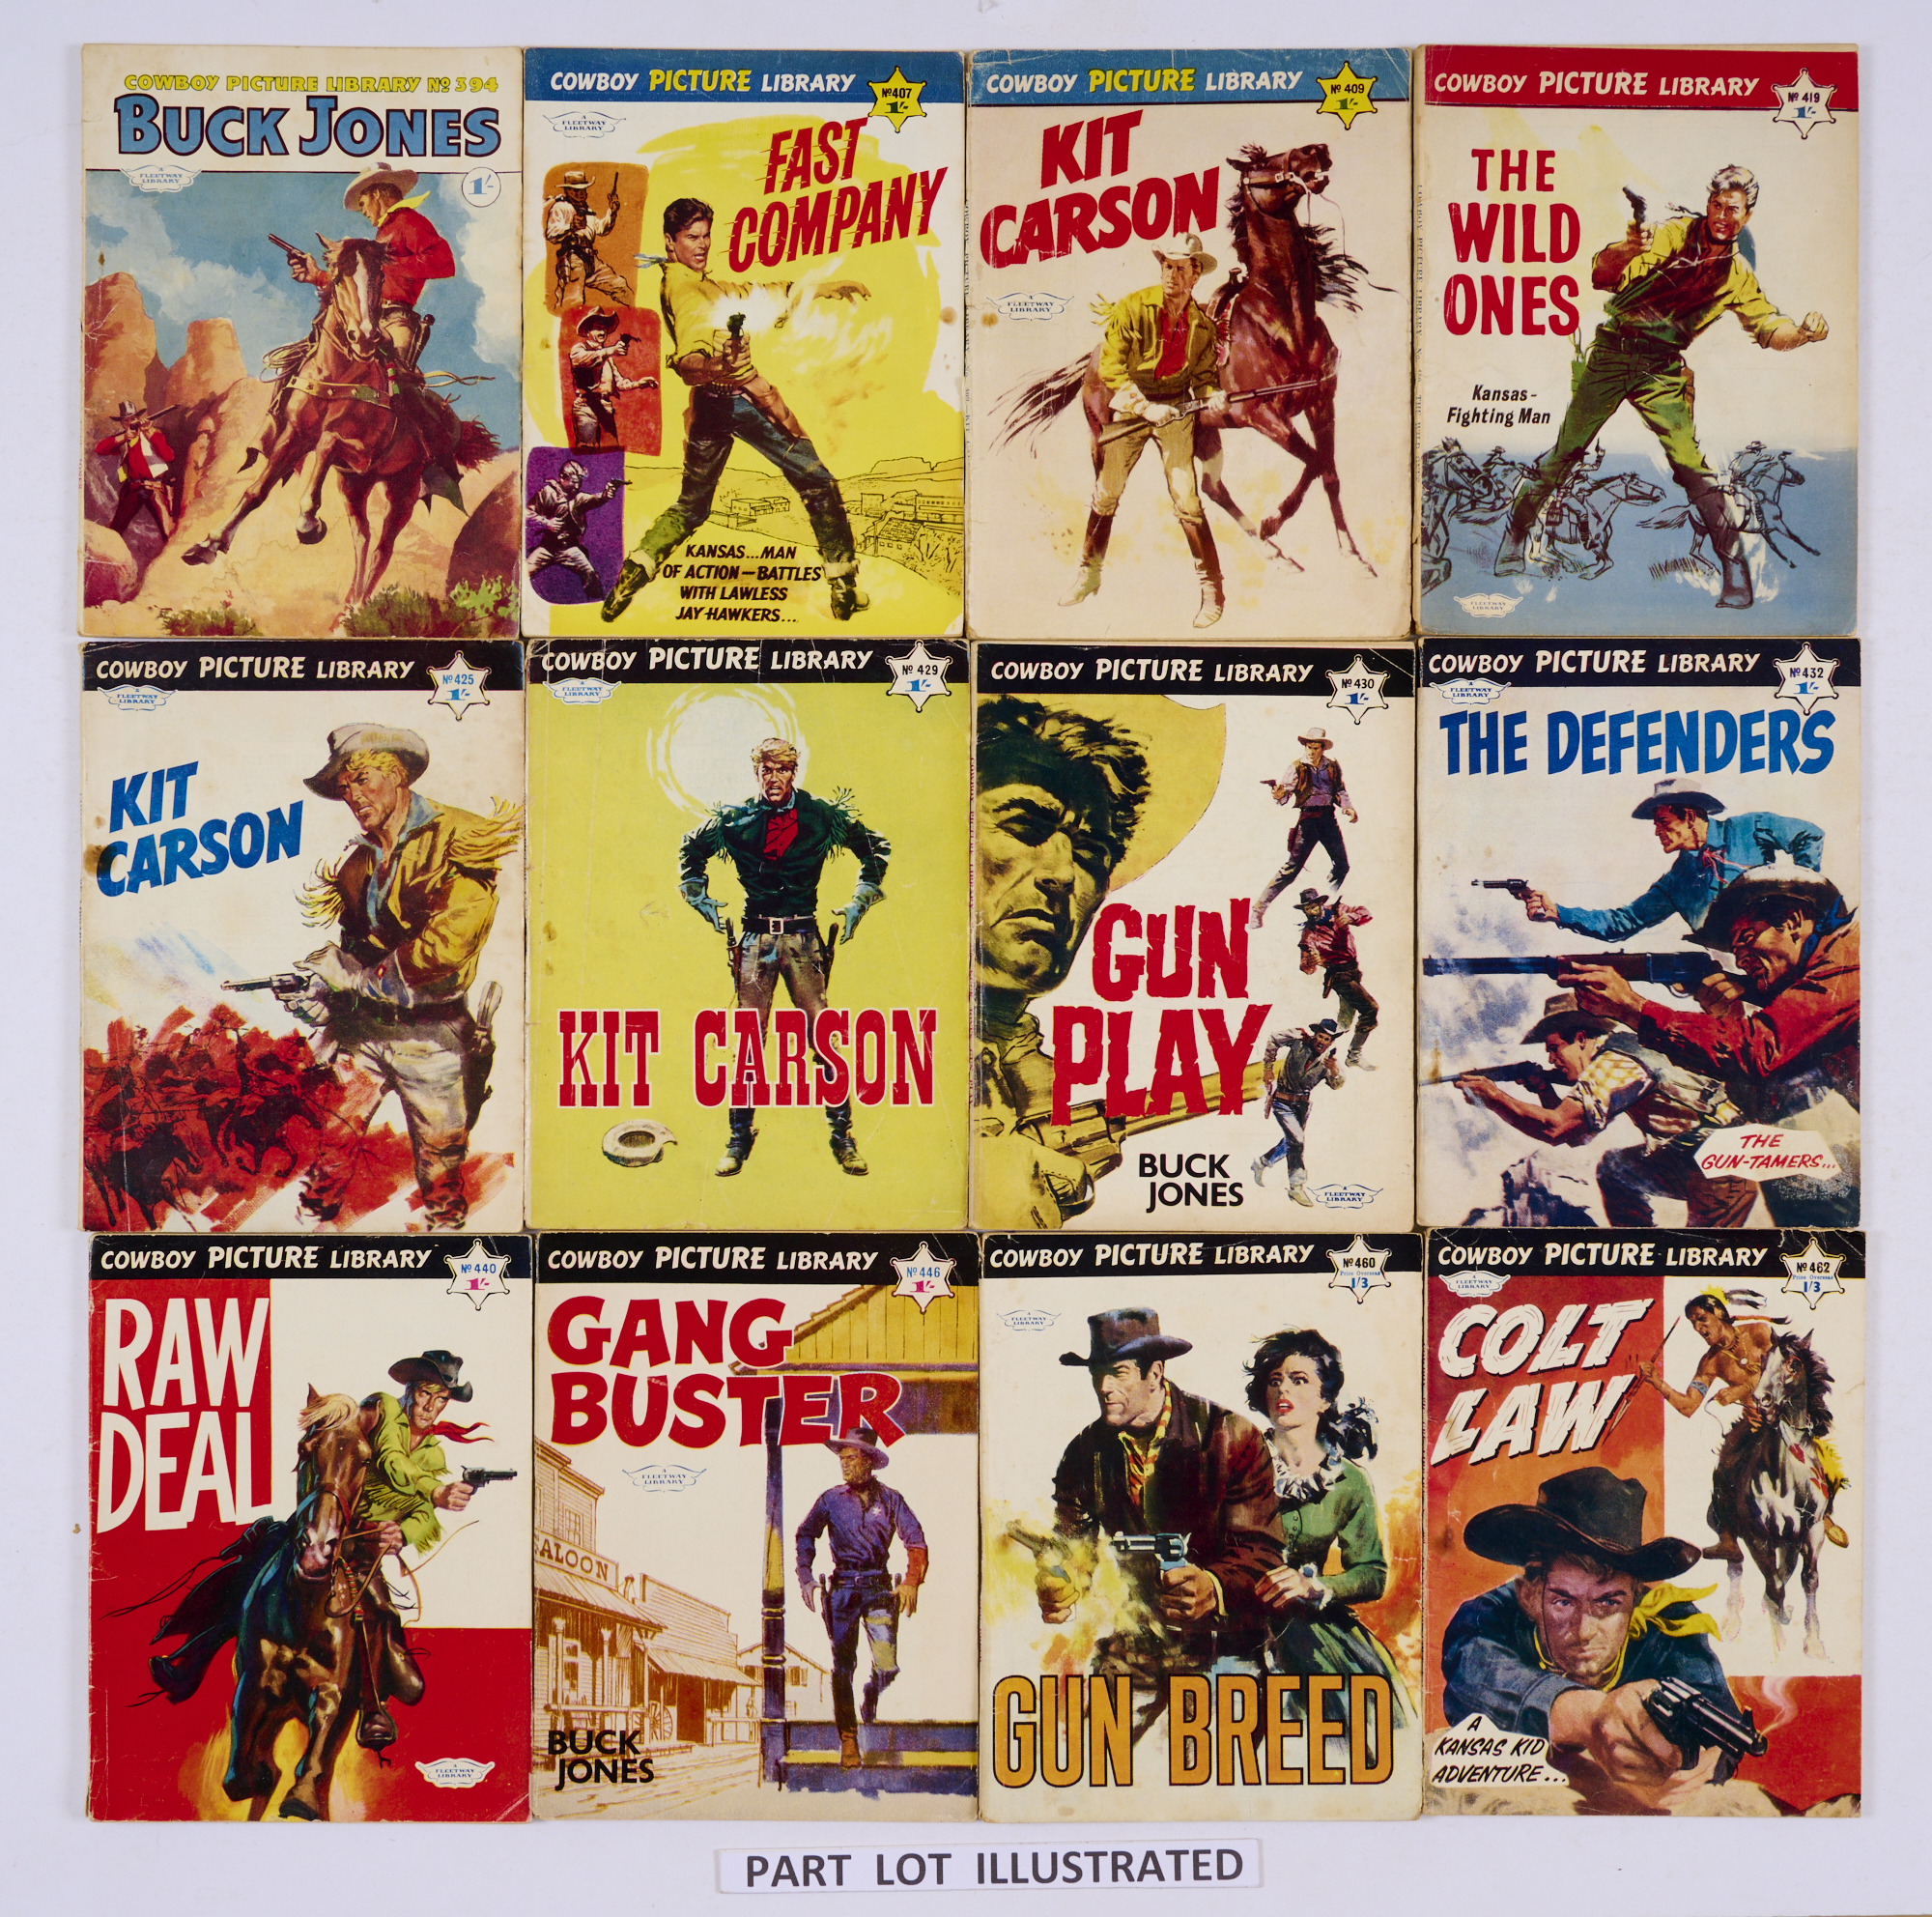 Cowboy Picture Library (1961-62) 394, 407, 409, 412, 415, 419, 425, 426, 429-432, 439, 440, 446,